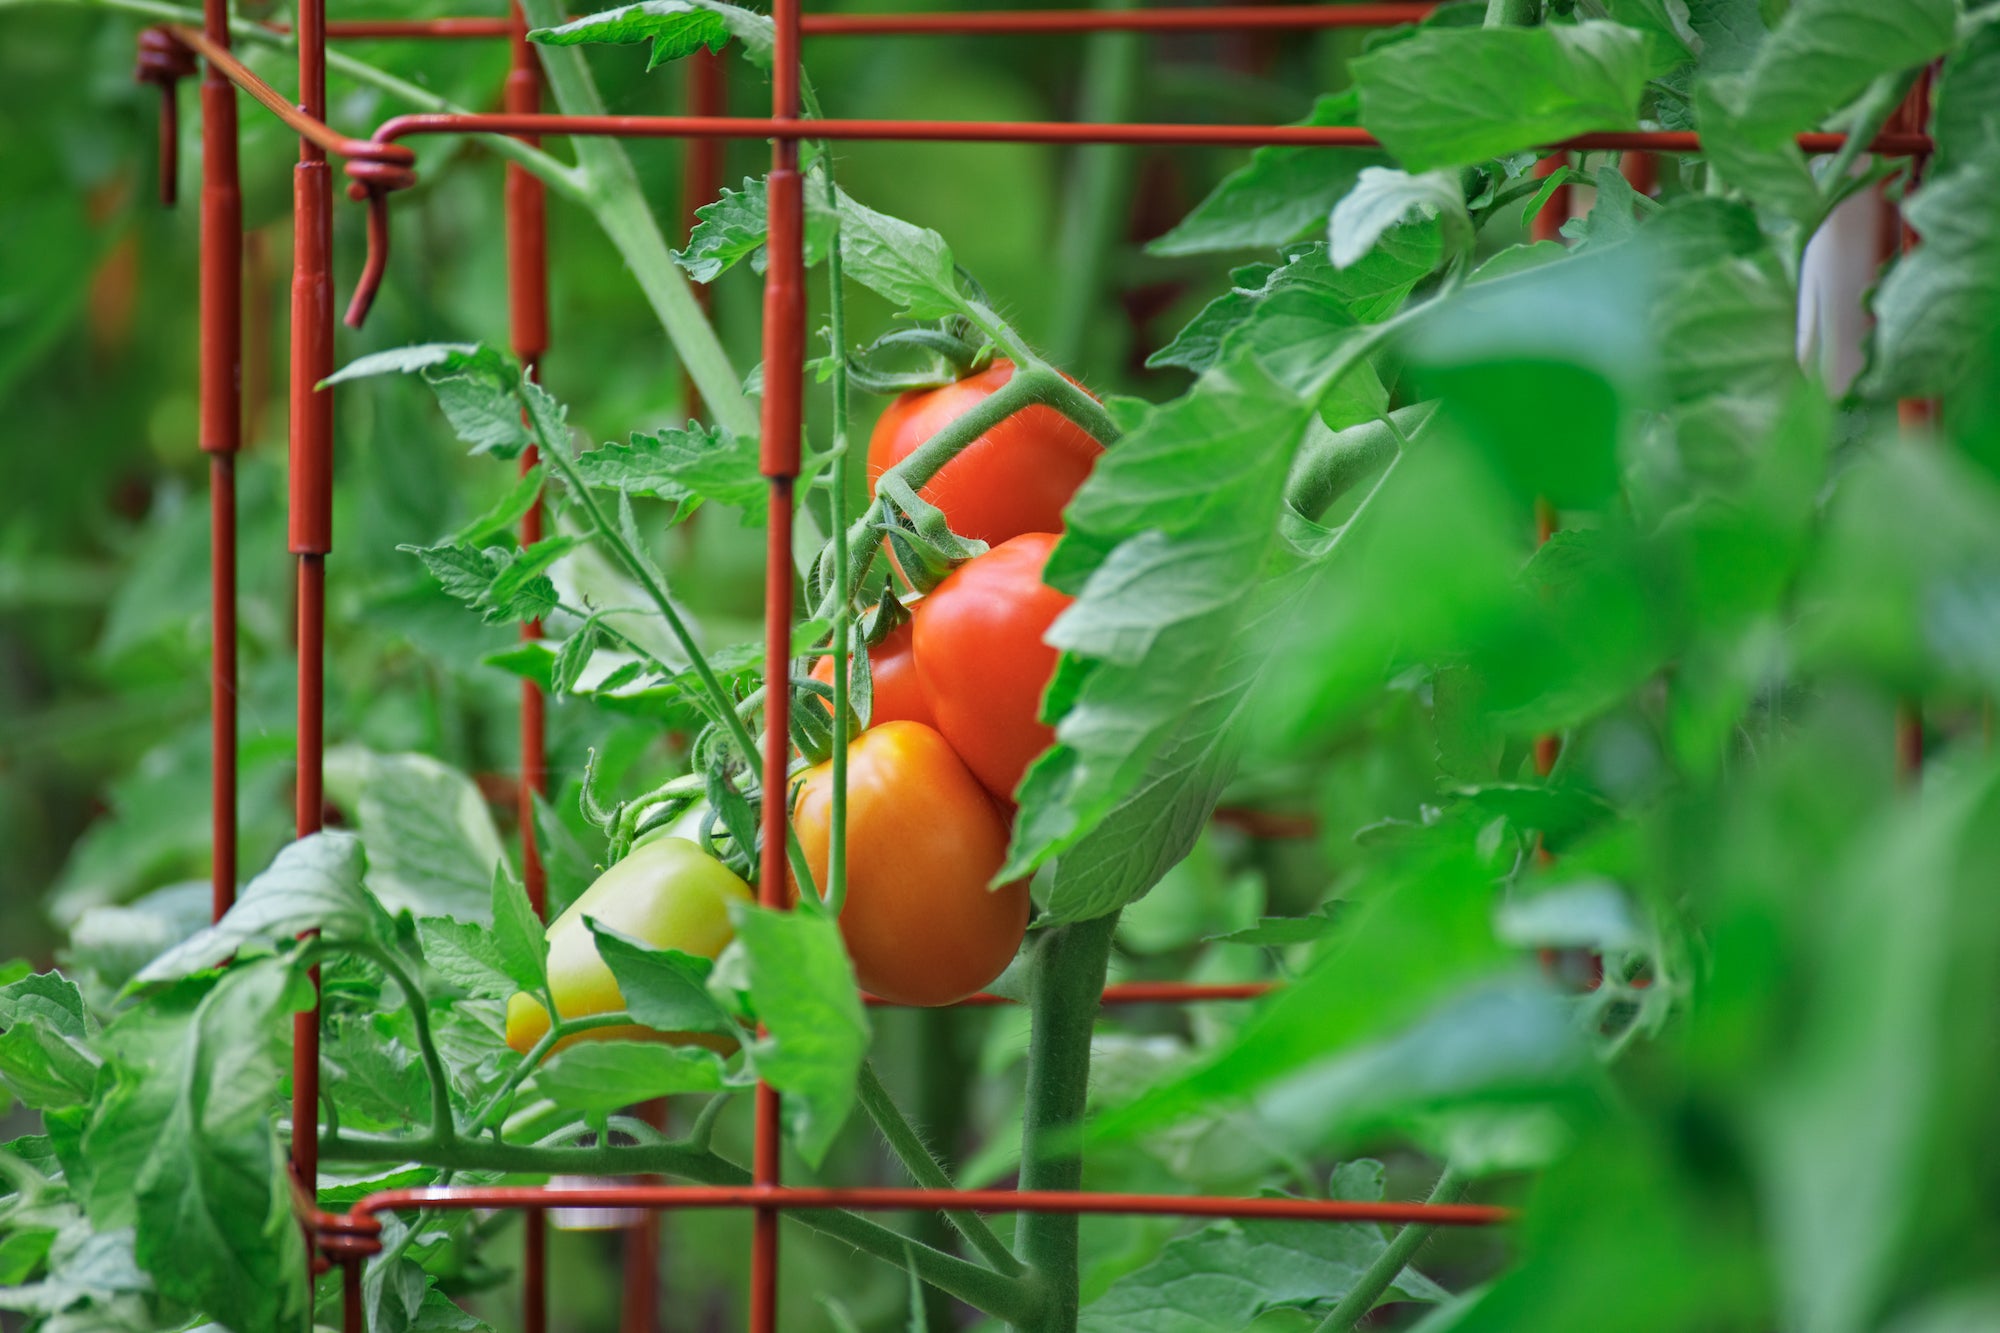 VEGGIE GARDEN VIDEO SERIES #9 - STAKING AND CAGING